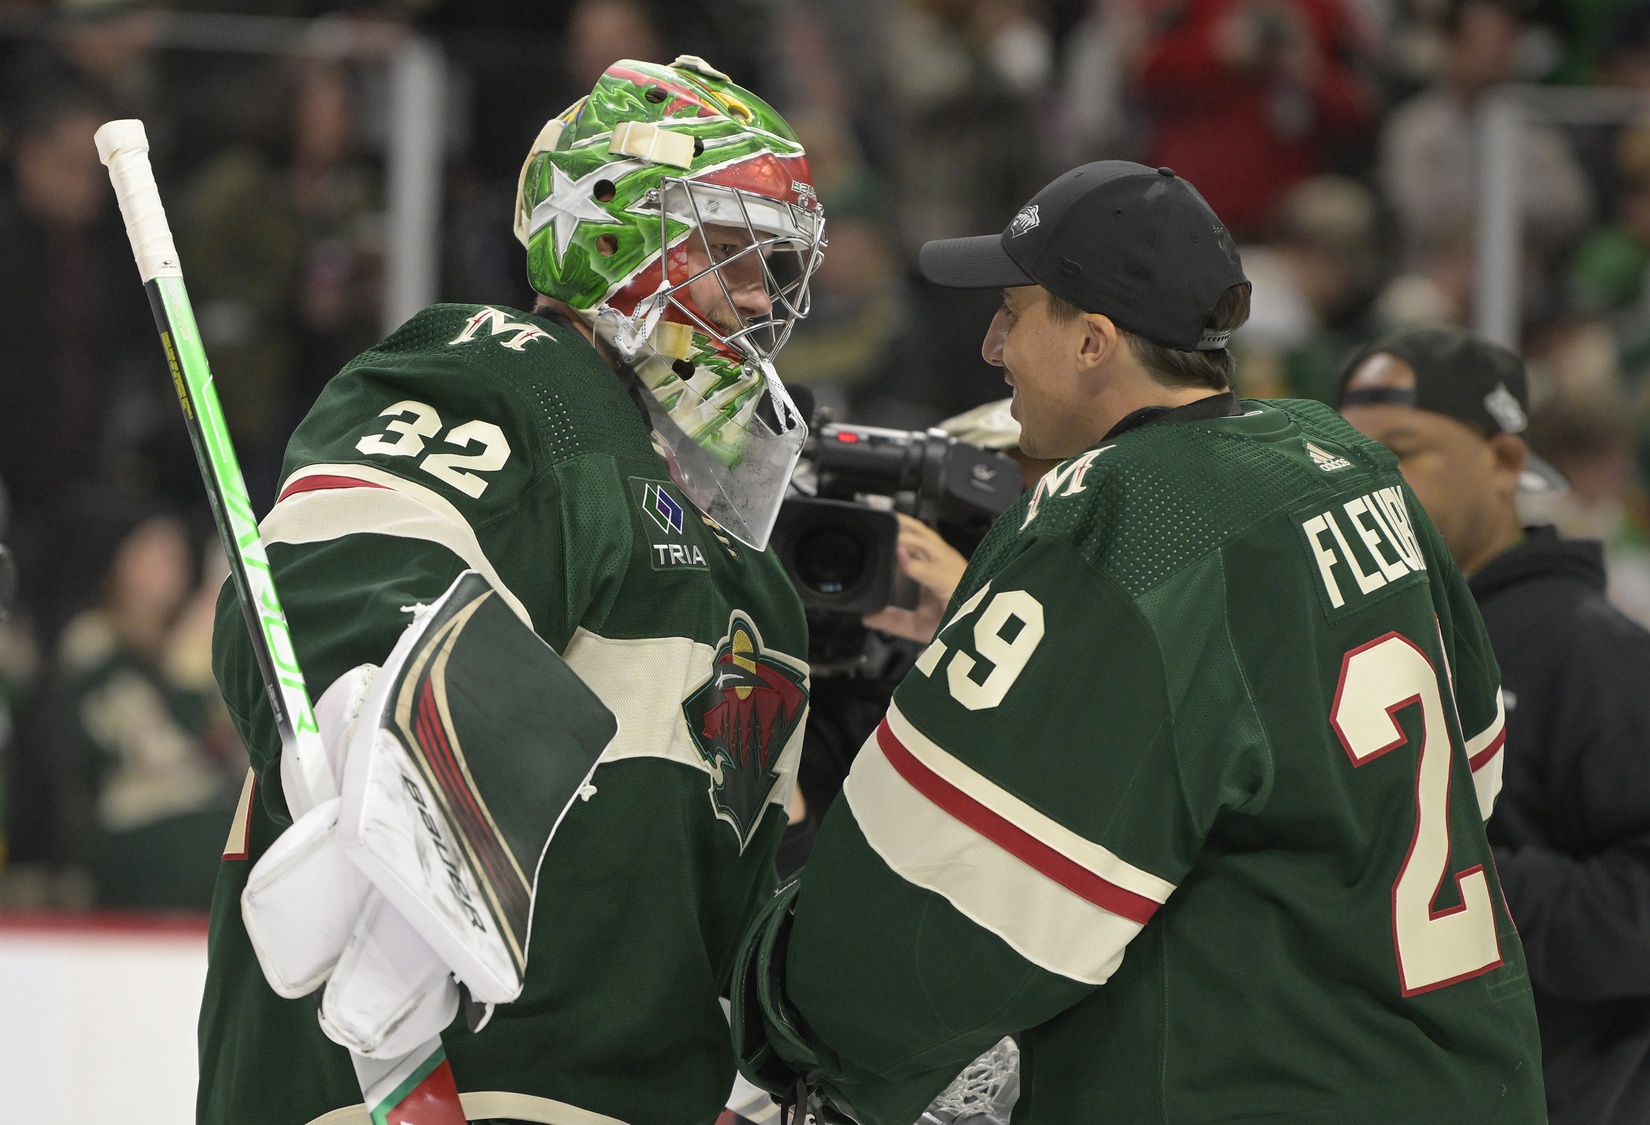 Wild's Crazy Game of Hockey Event Kicks Off This Weekend